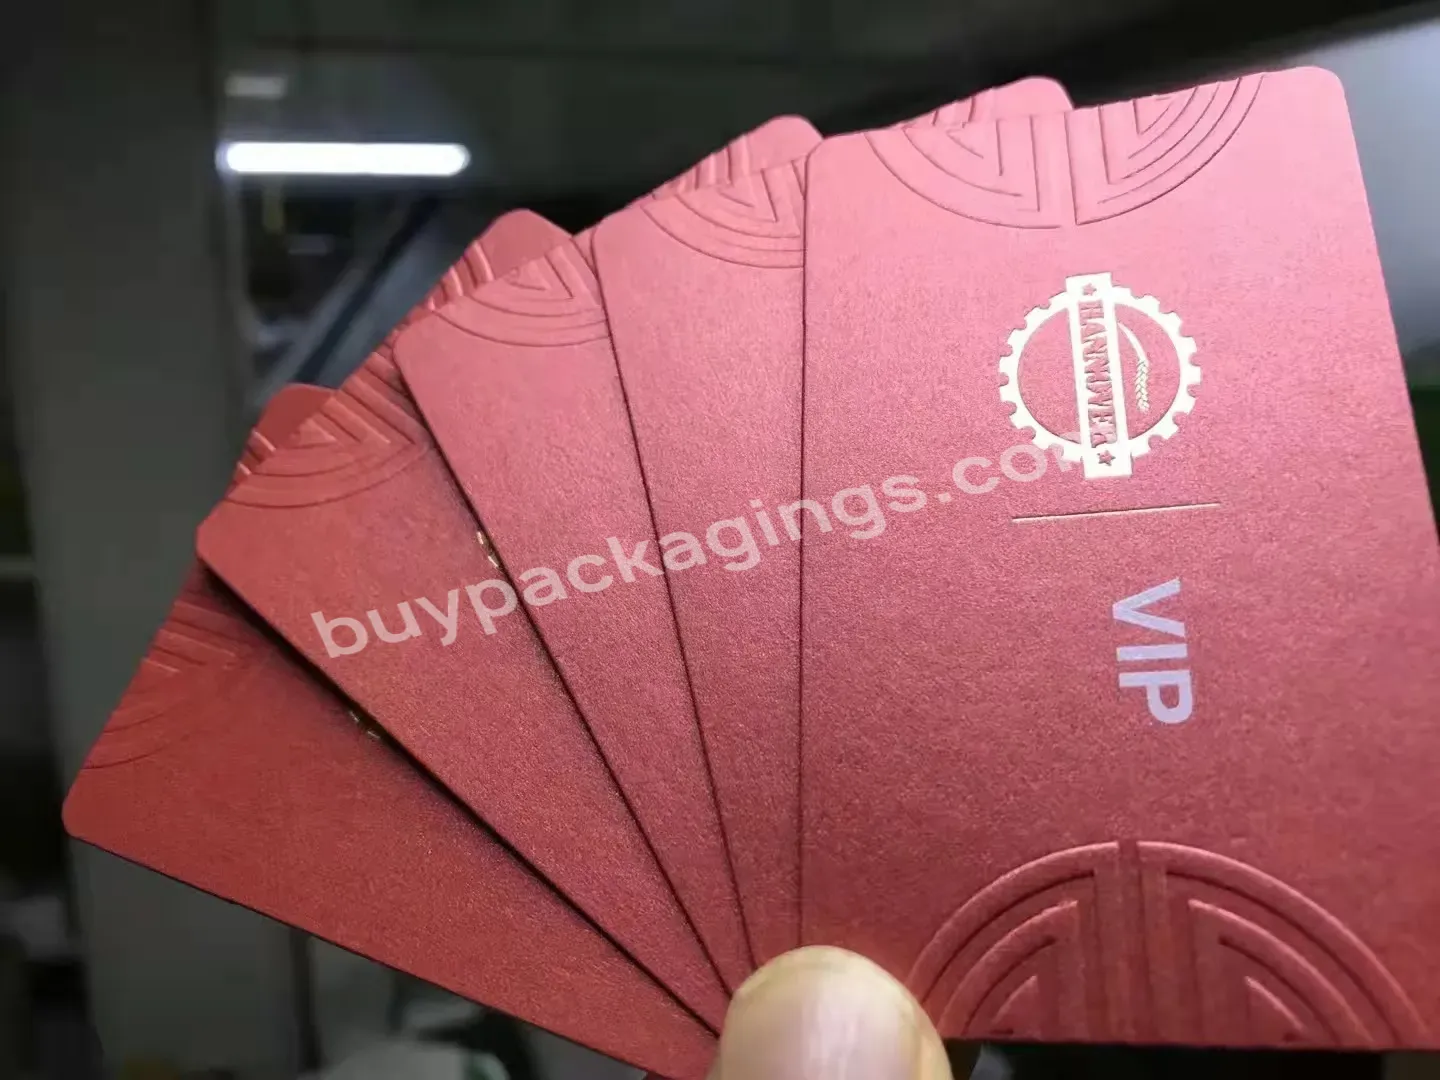 Business Card Emboss Cotton Paper High Quality Smooth Golden Edge Uv Security Printing Banknote Cotton Paper Security Thread - Buy Business Card Emboss Cotton Paper,High Quality Smooth Golden Edge,Uv Security Printing Banknote Cotton Paper Security T